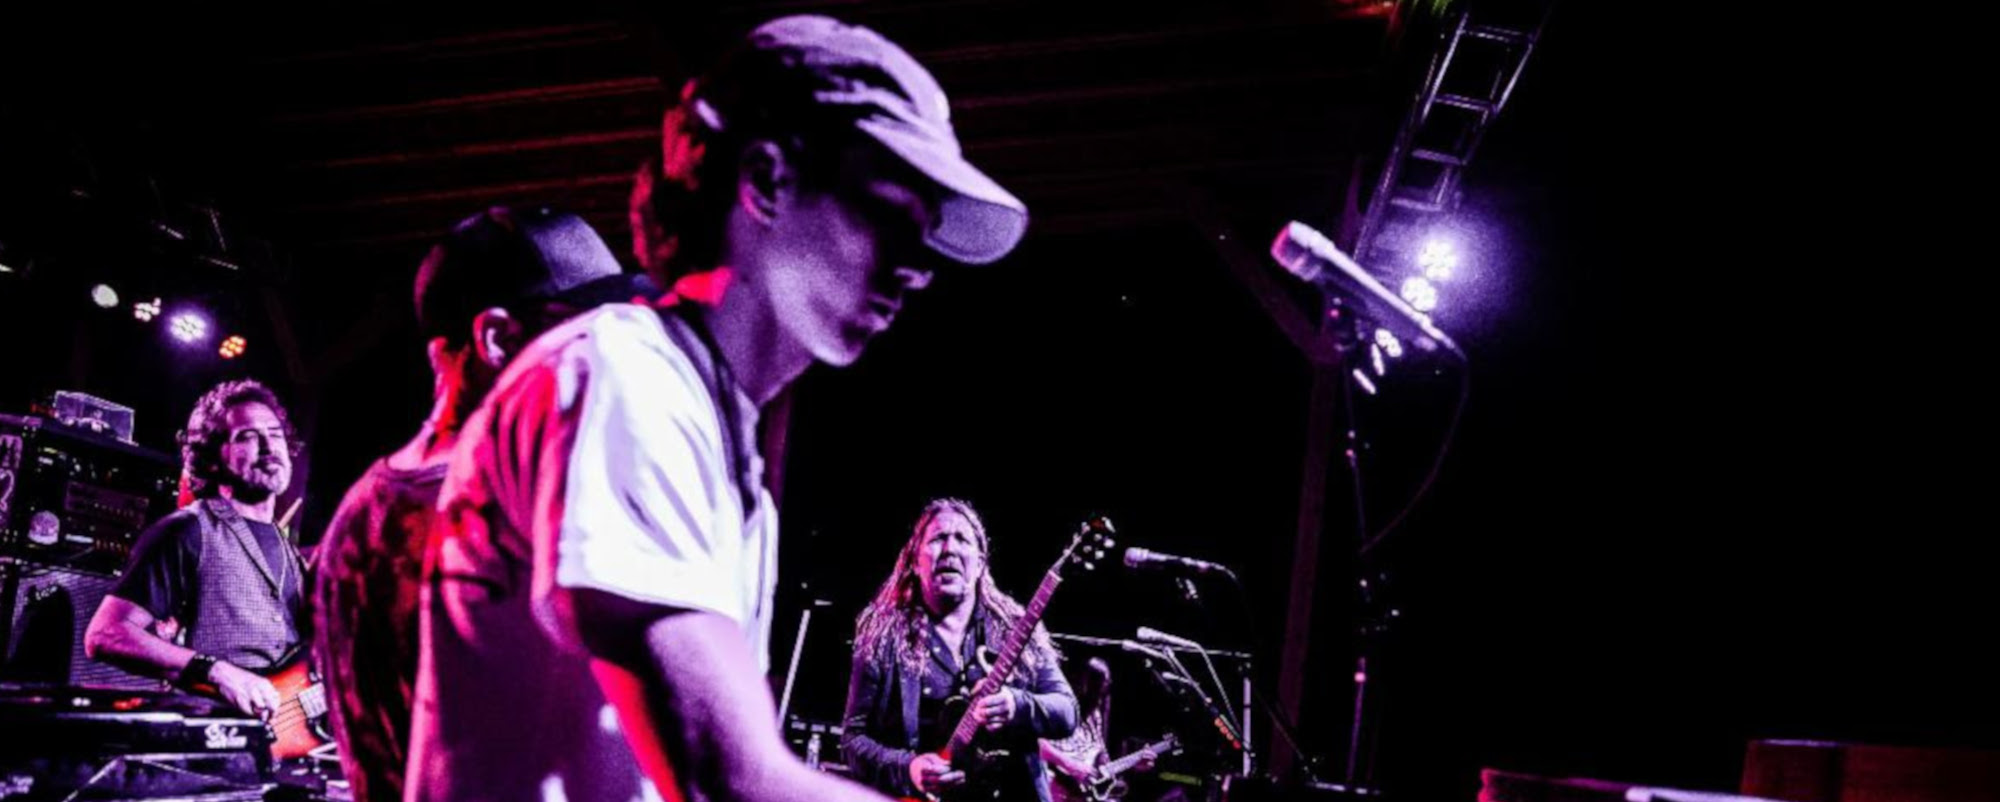 Gregg Allman’s Grandson Makes Stage Debut With The Allman Betts Band